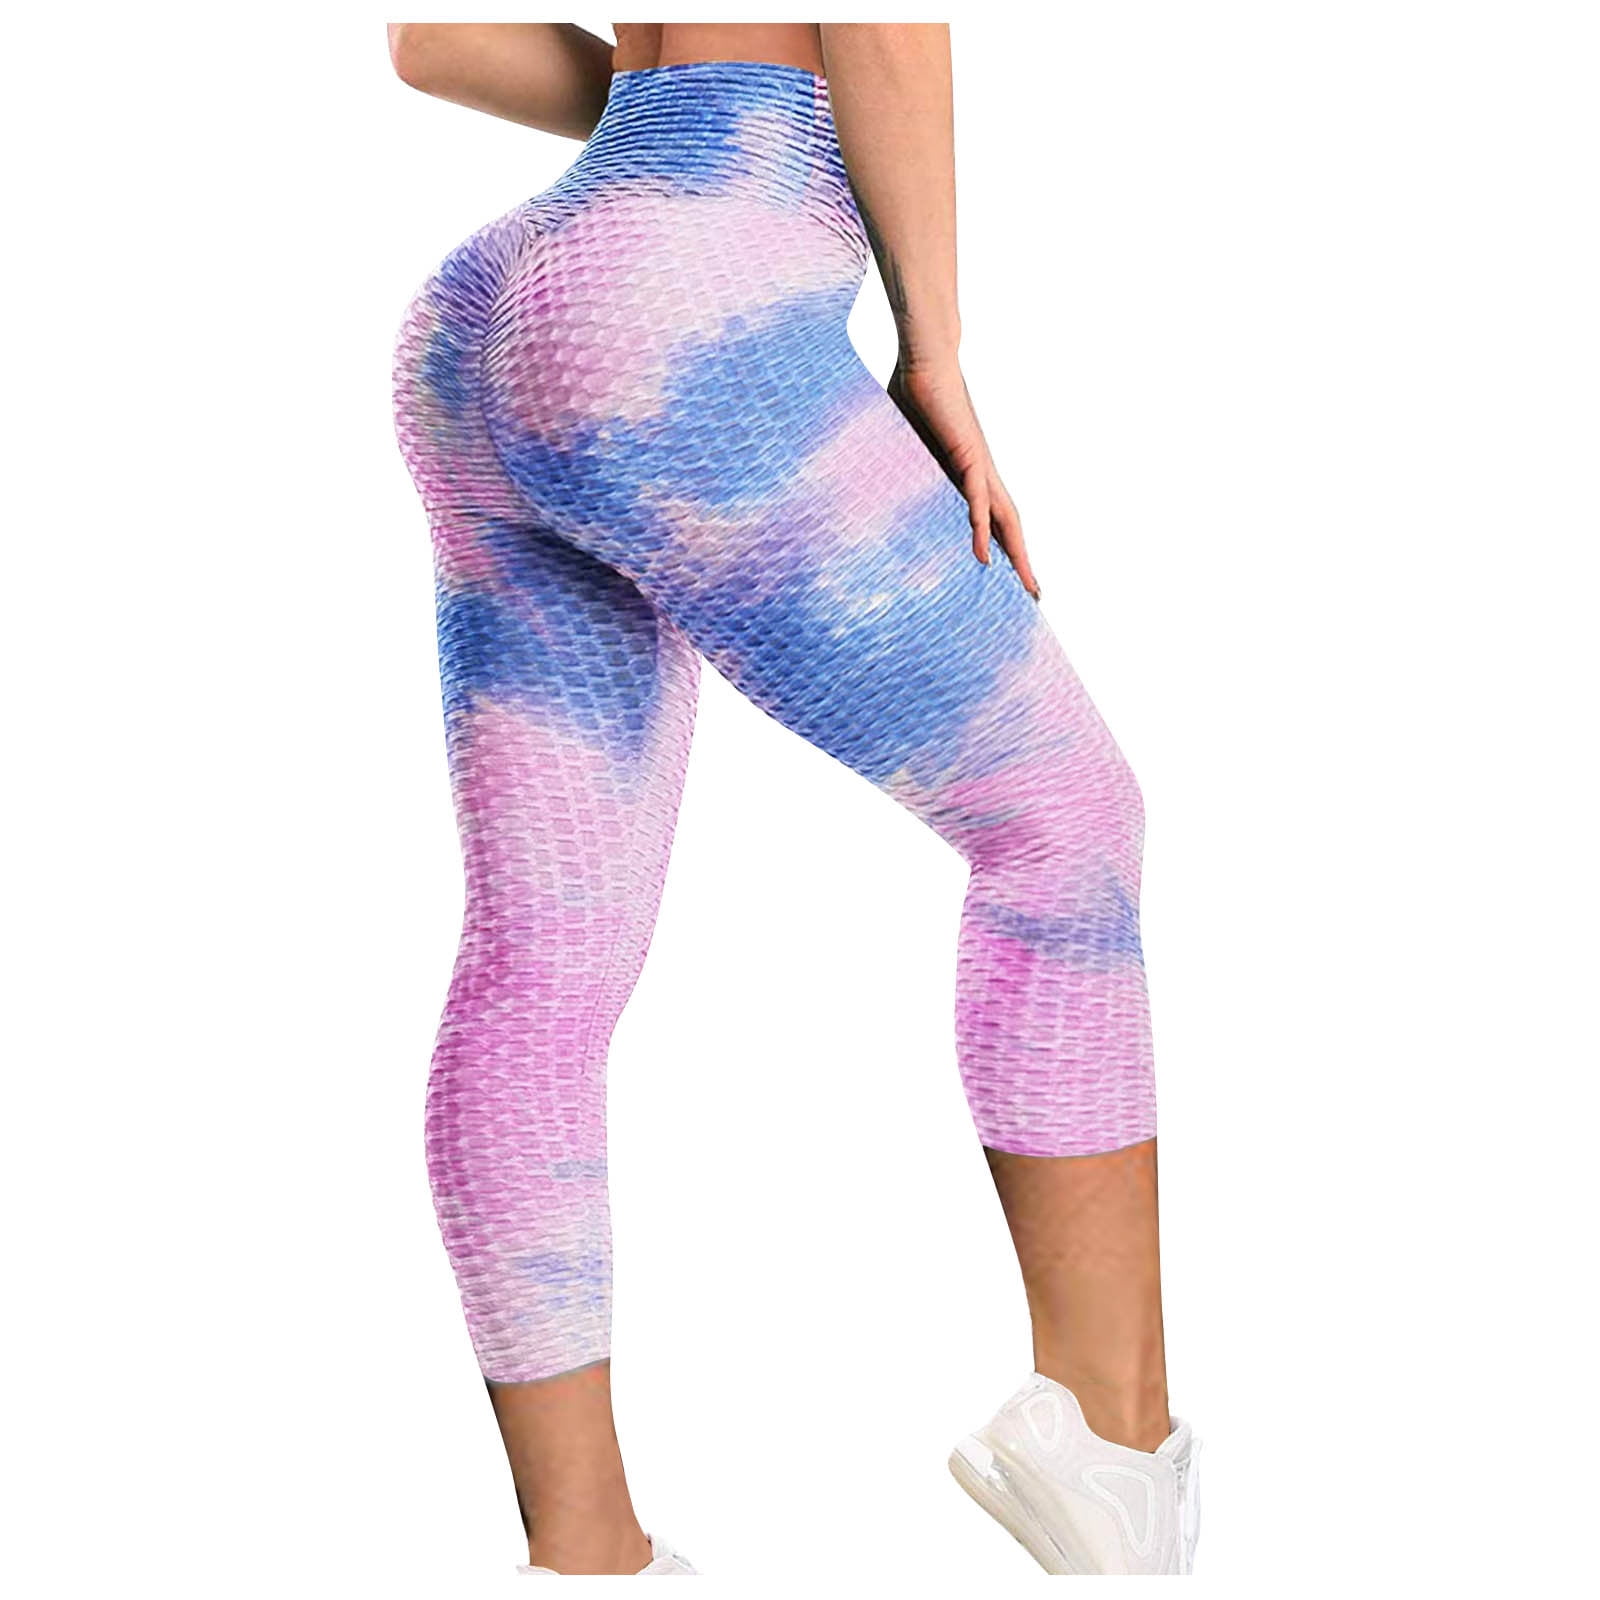 Ayolanni Leather Leggings for Women Women's Tie-Dye Breathable Hip